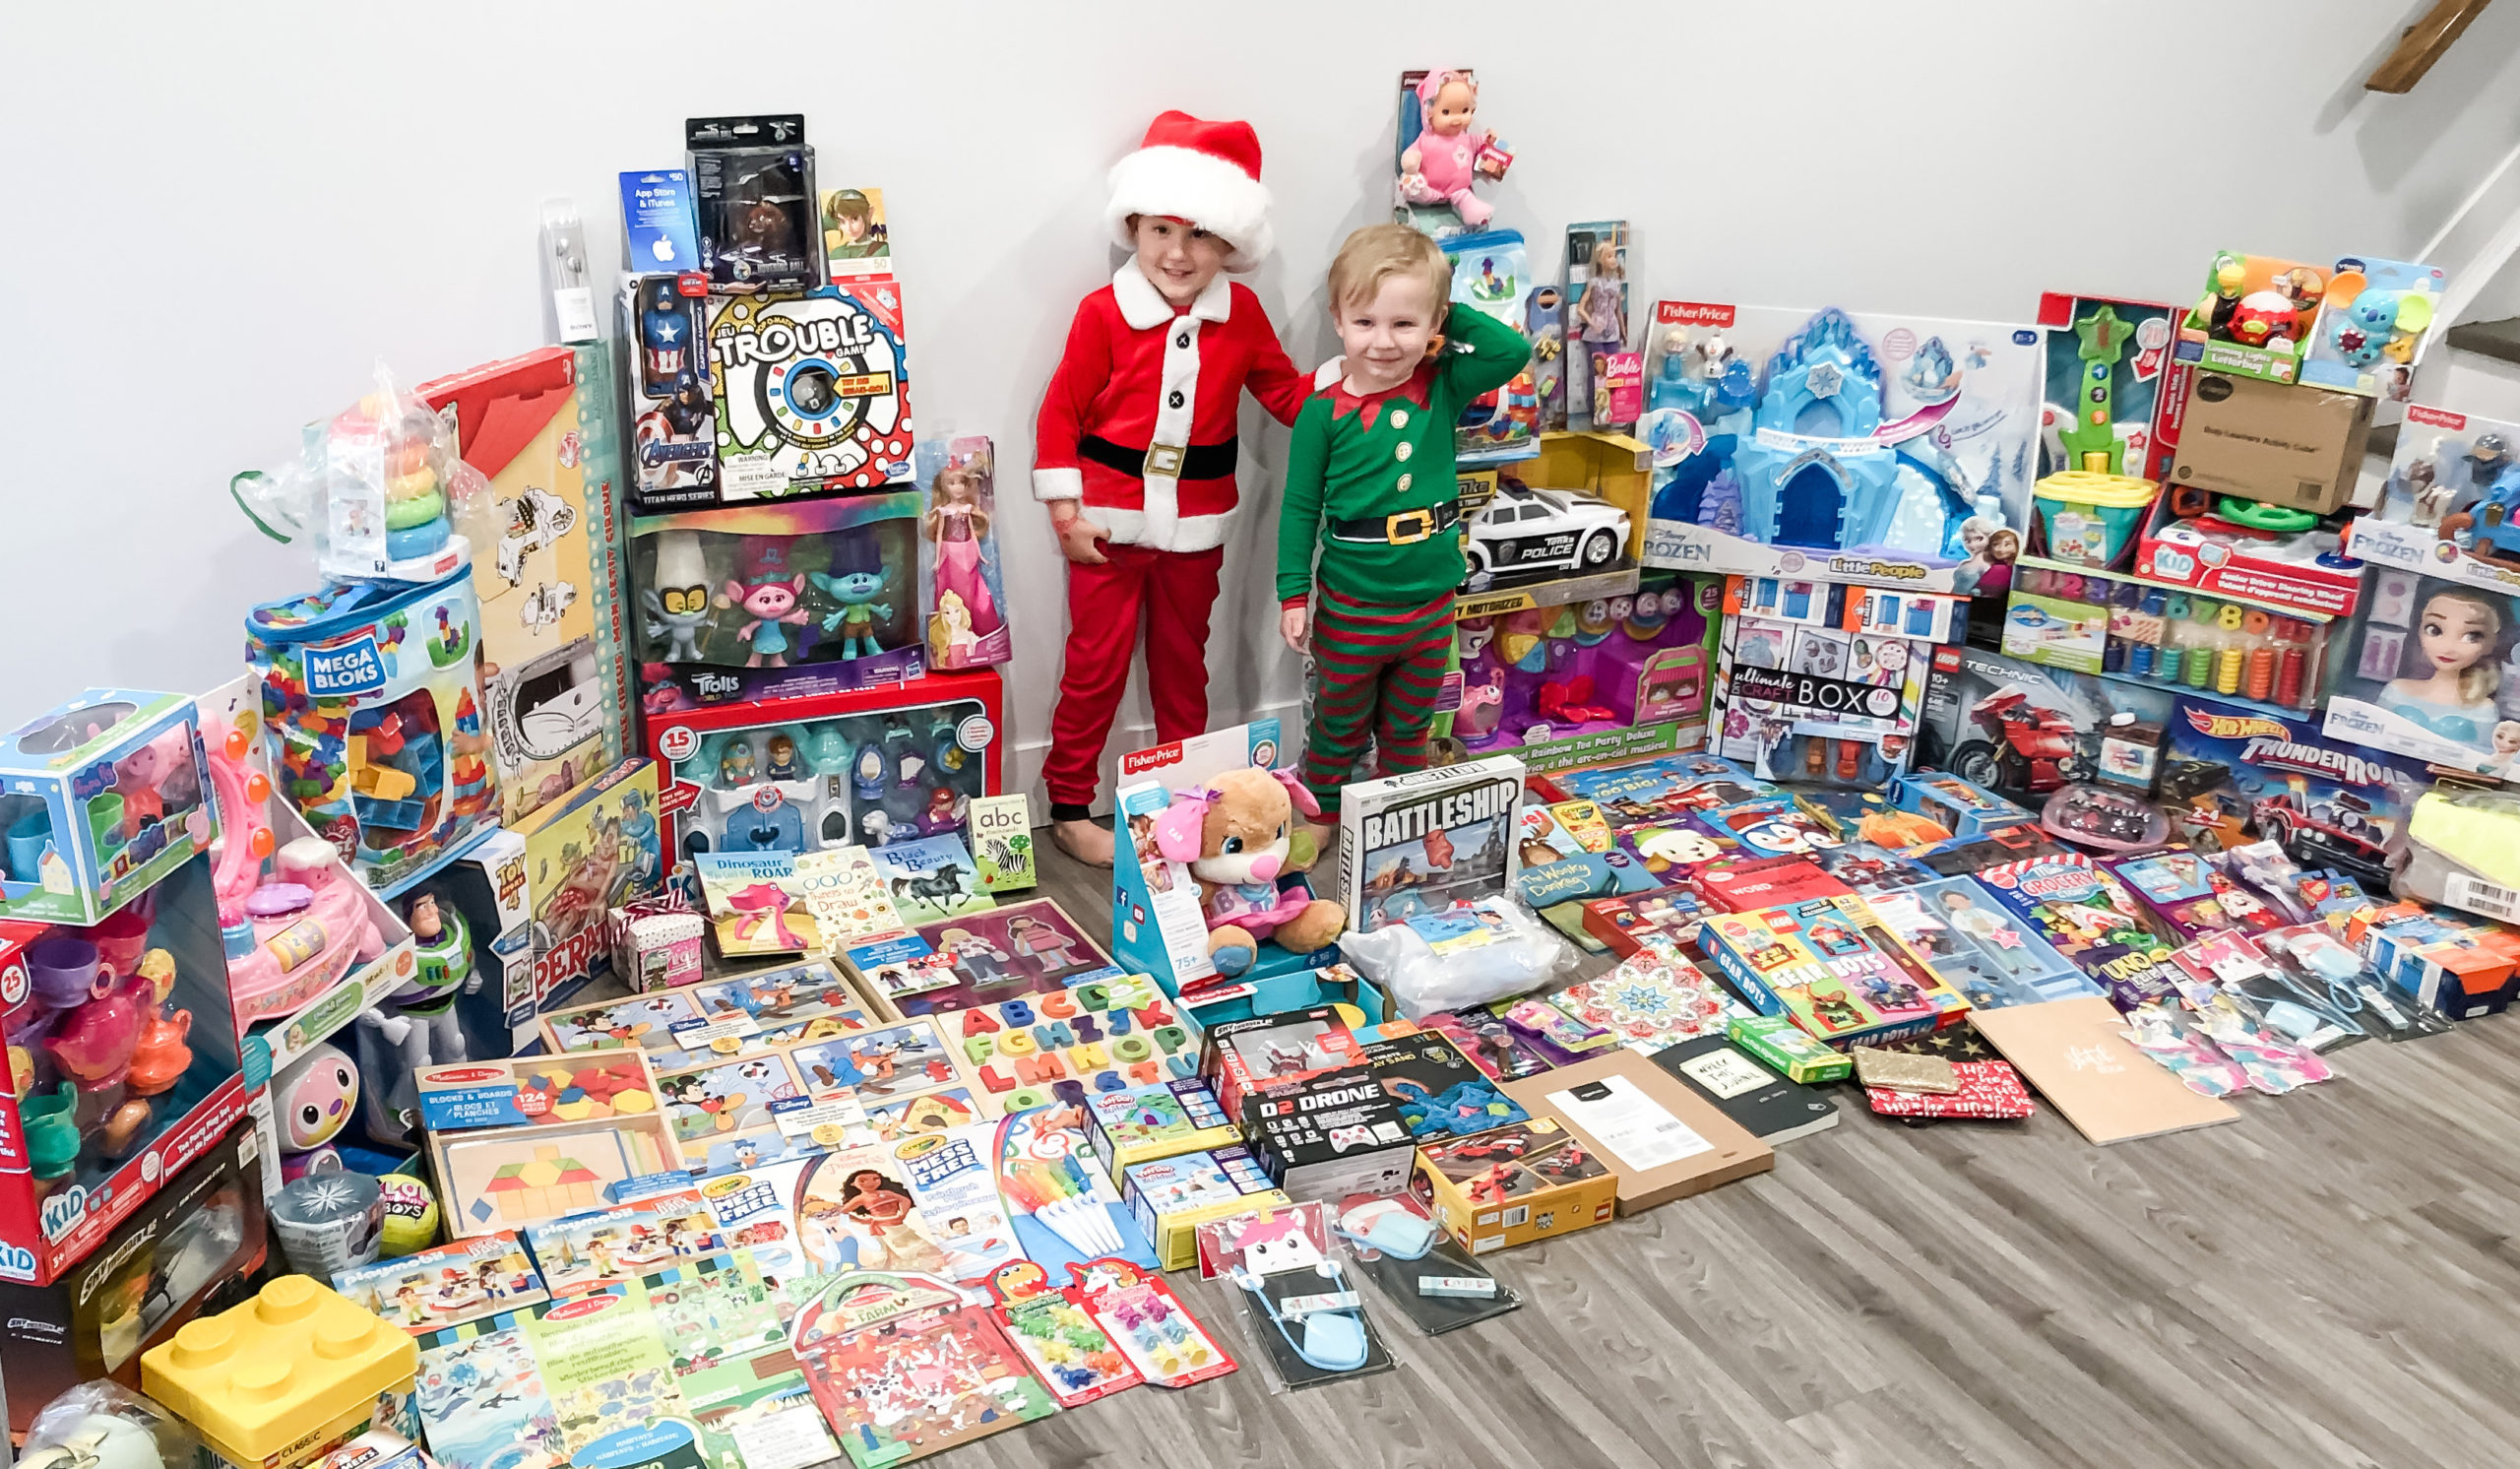 Colton & Lochlan collected toys for kids at Children's Hospital